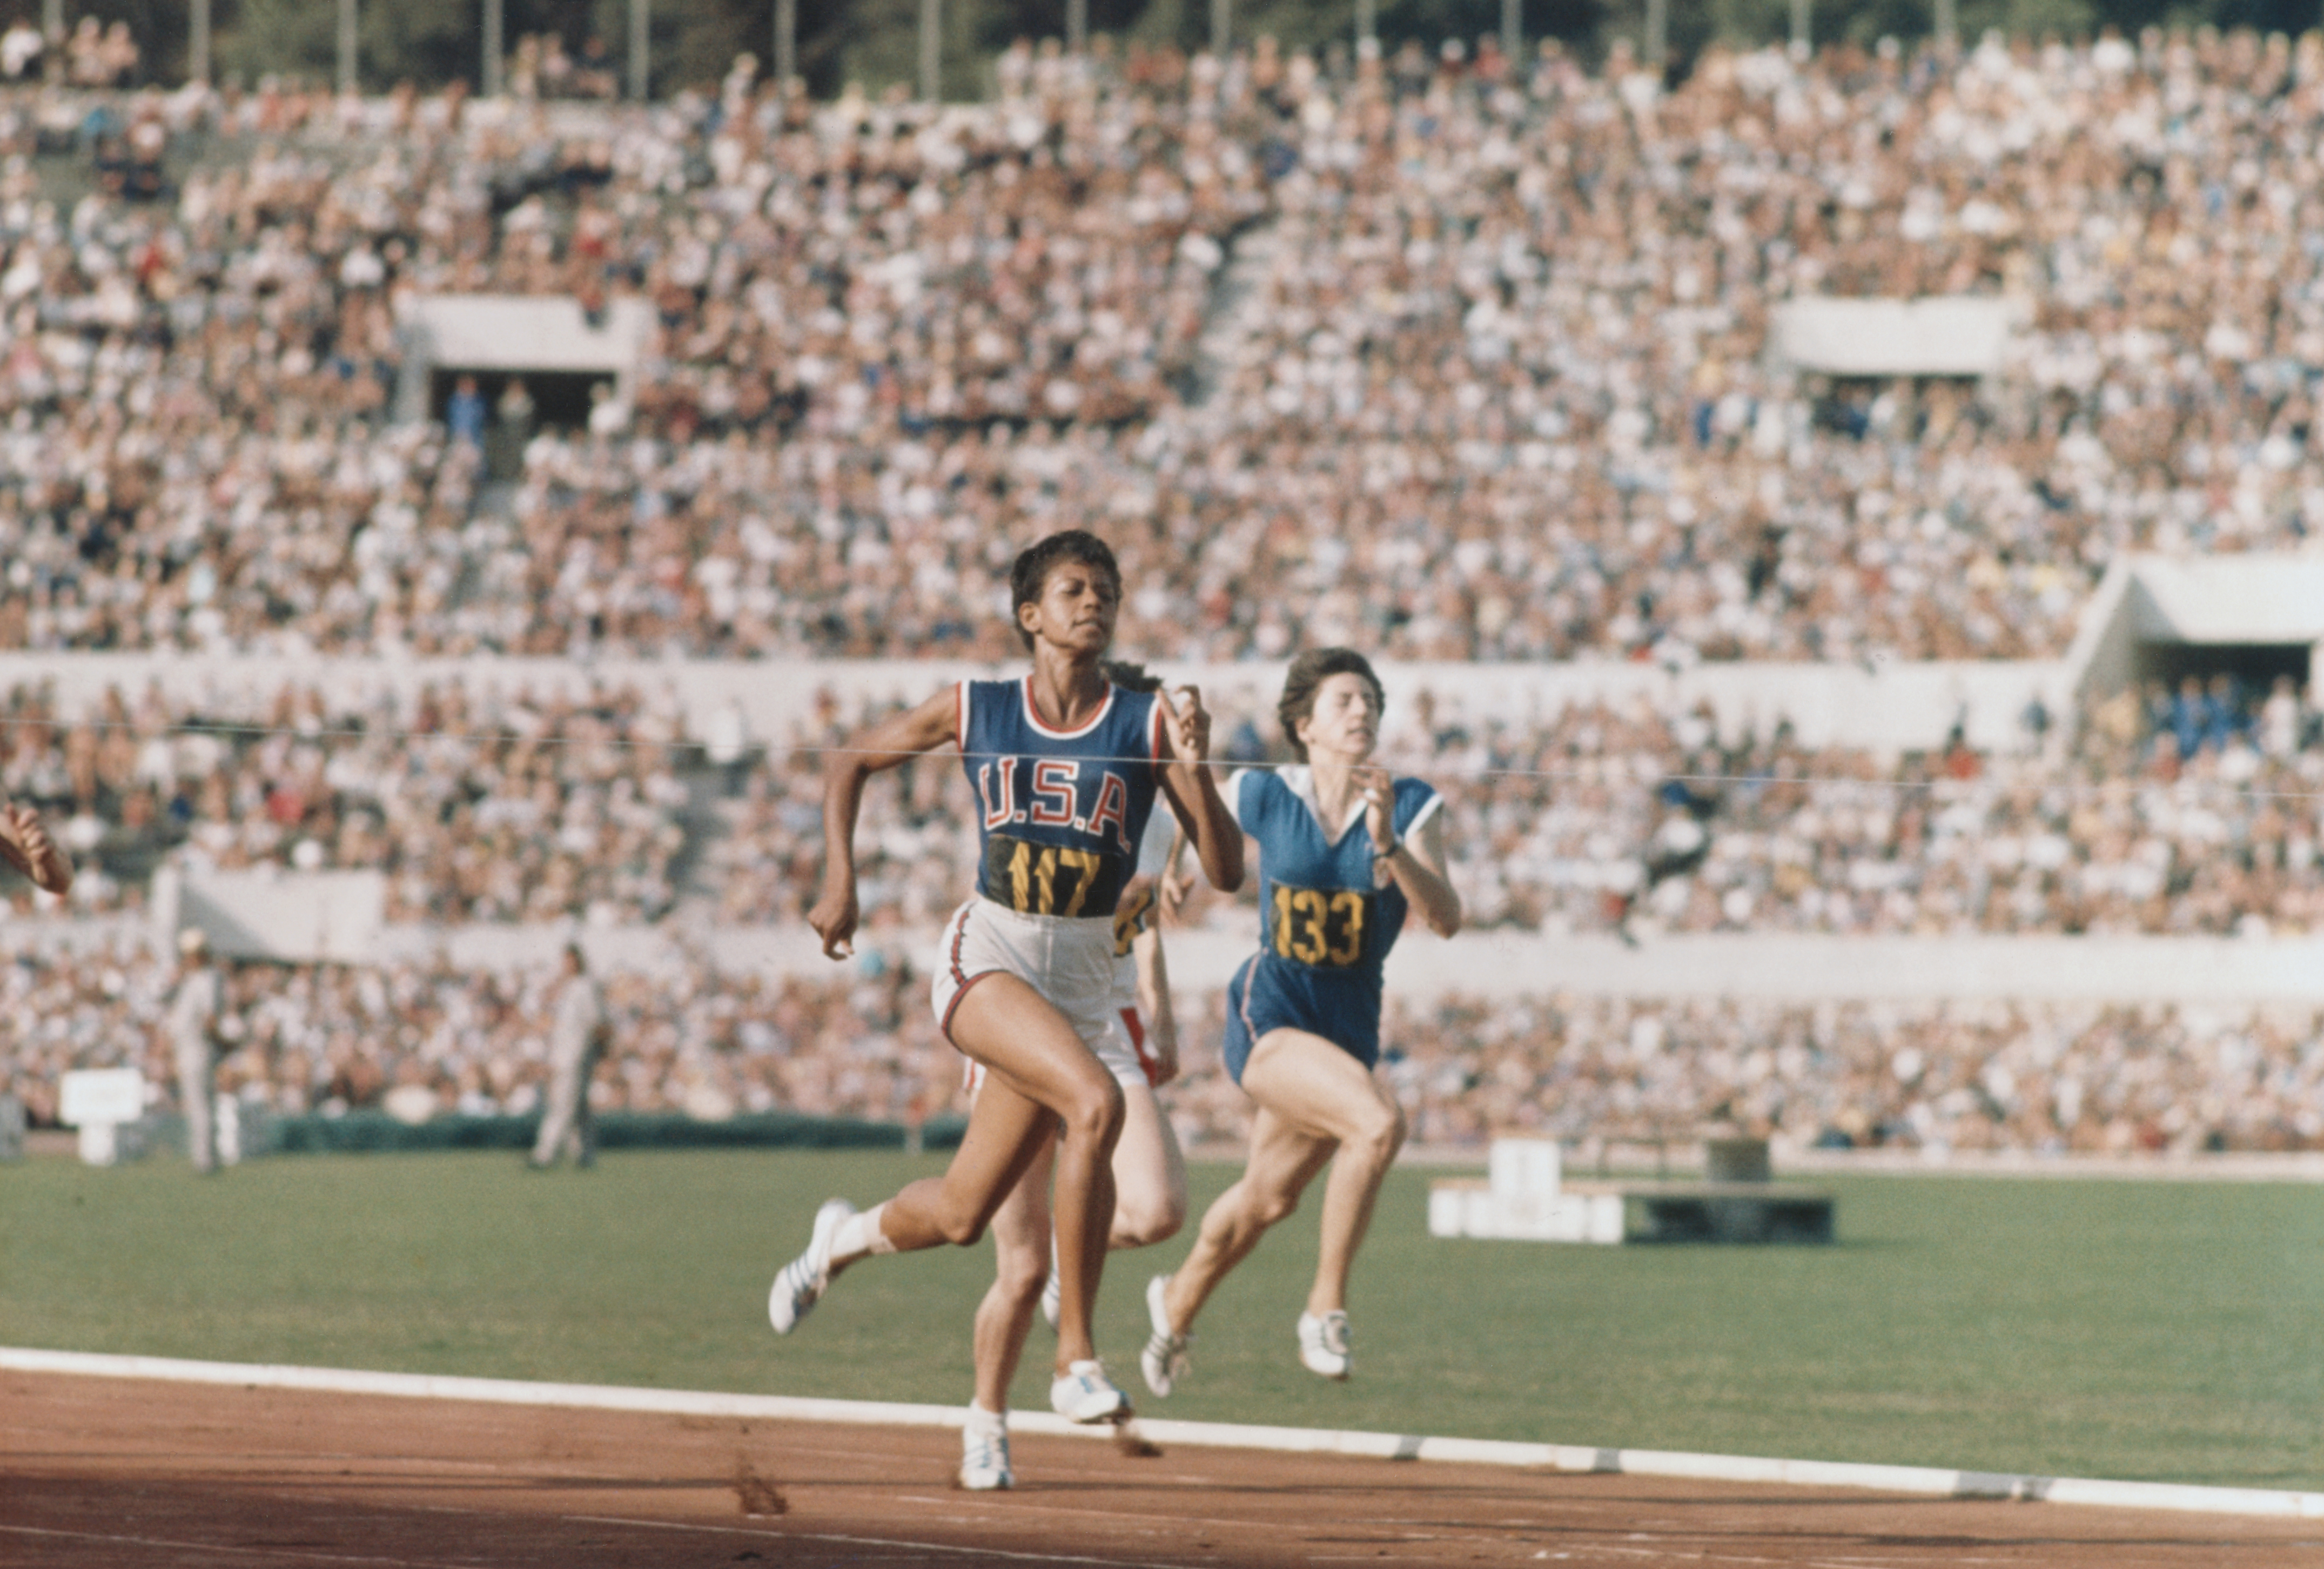 A Look At The Technology Behind The Track Olympic Uniforms